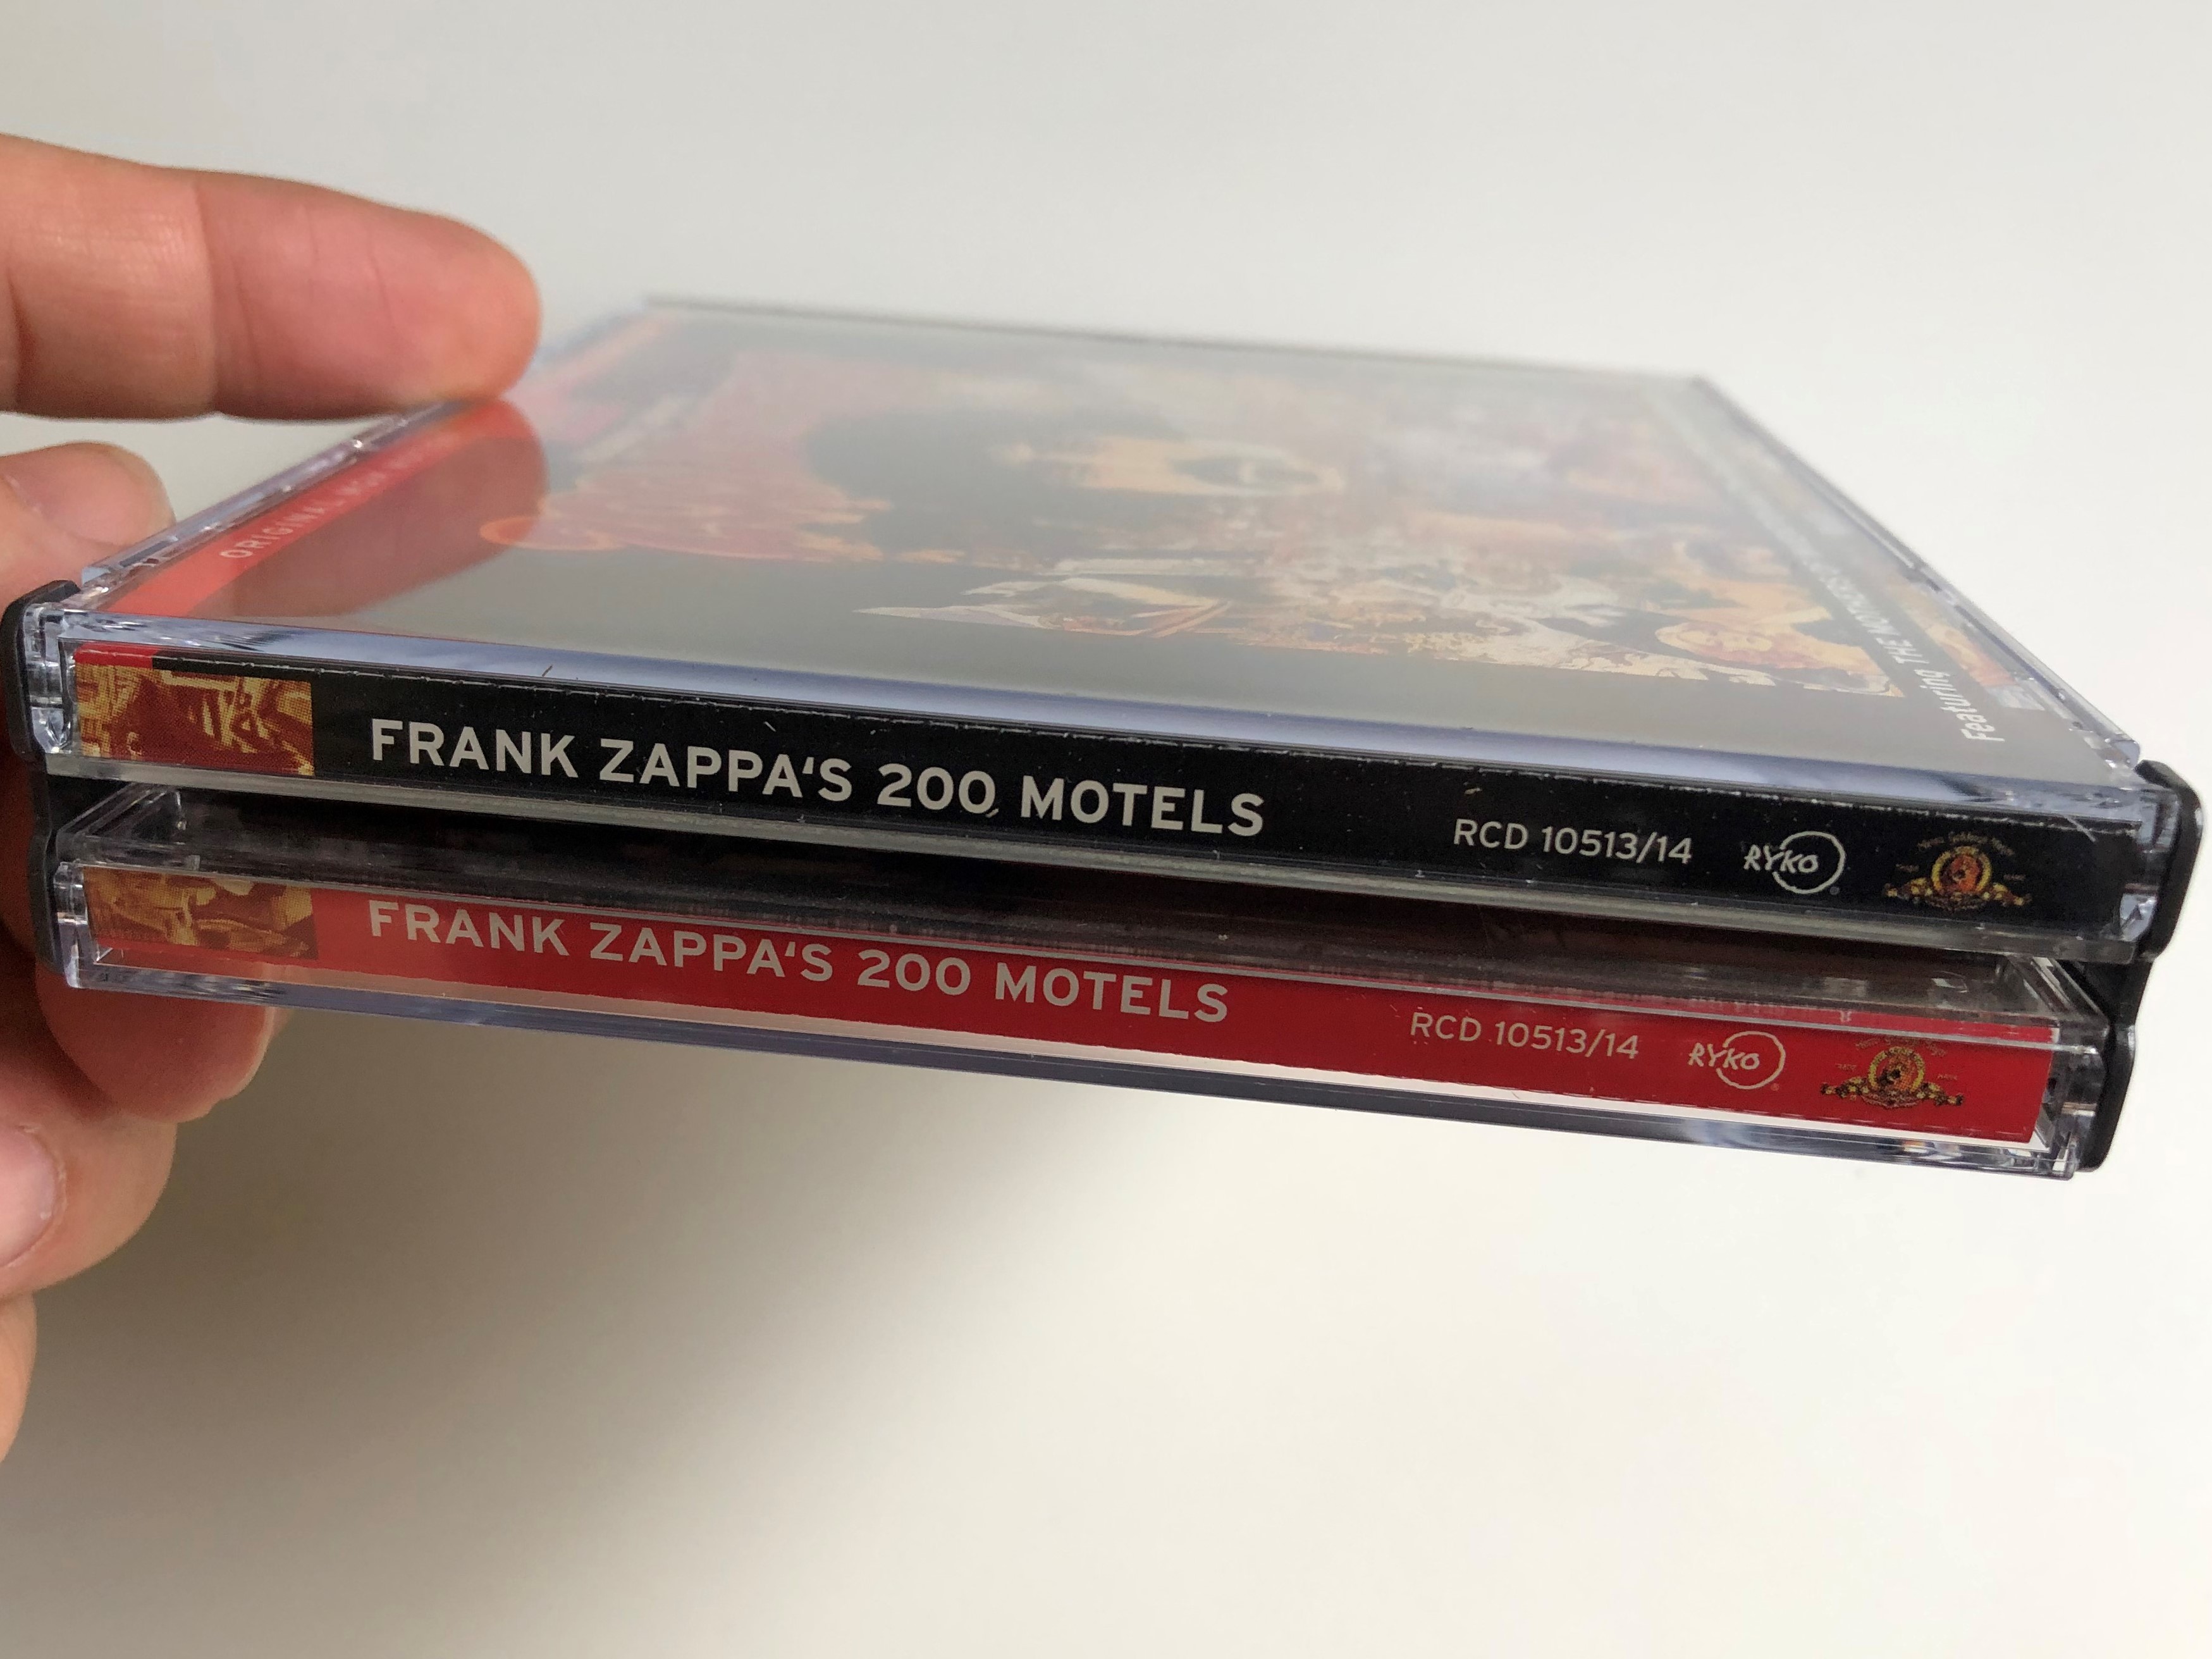 frank-zappa-200-motels-original-mgm-motion-picture-soundtrack-featuring-the-mothers-of-invention-and-the-royal-philharmonic-orchestra-rykodisc-2x-audio-cd-1997-rcd-1051314-2-.jpg